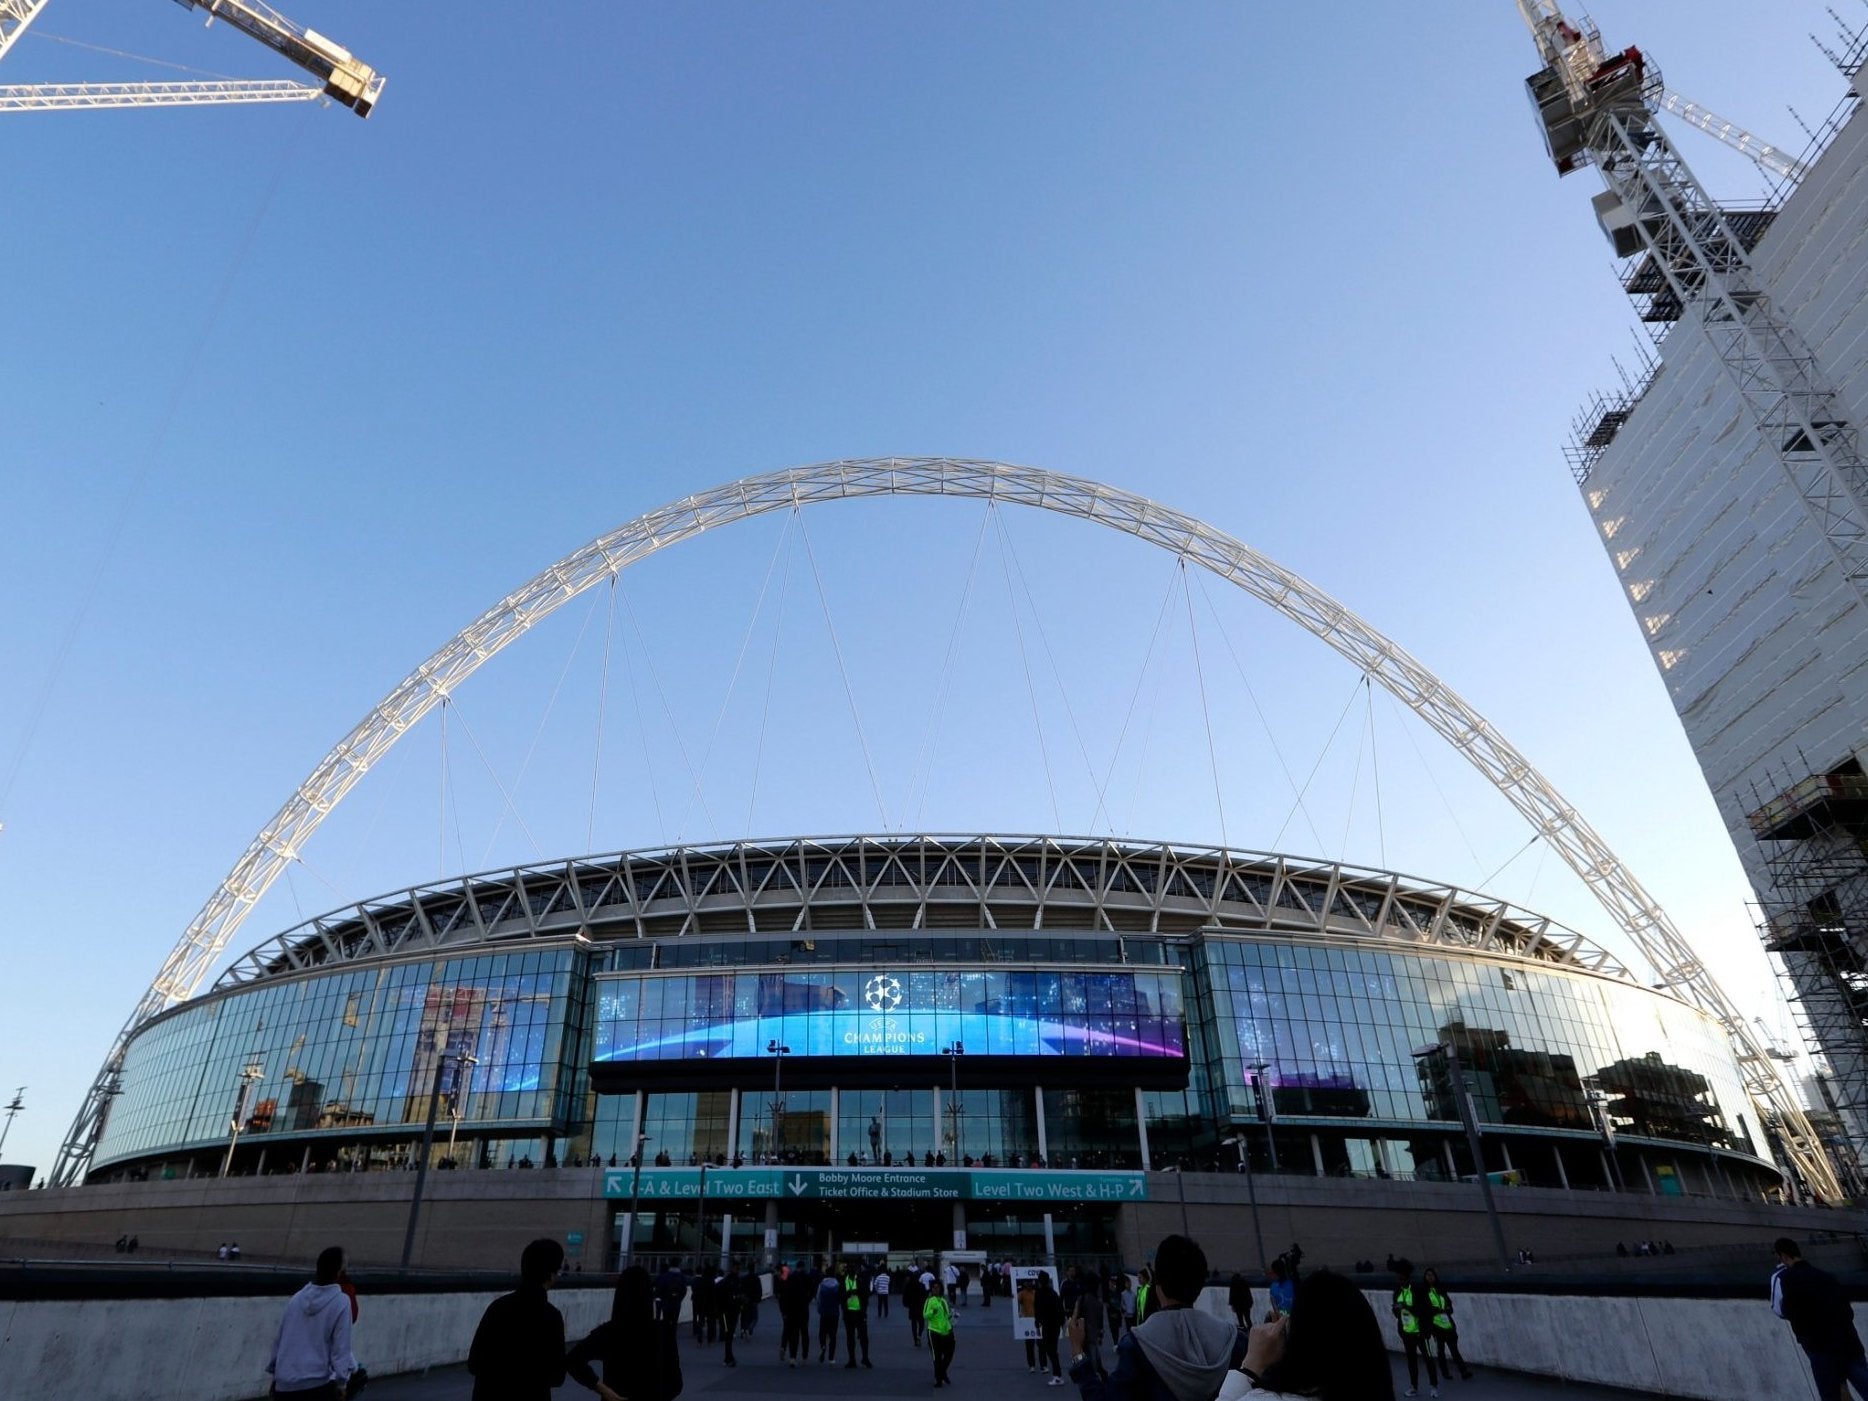 It remains unclear as to when Tottenham will move out of Wembley